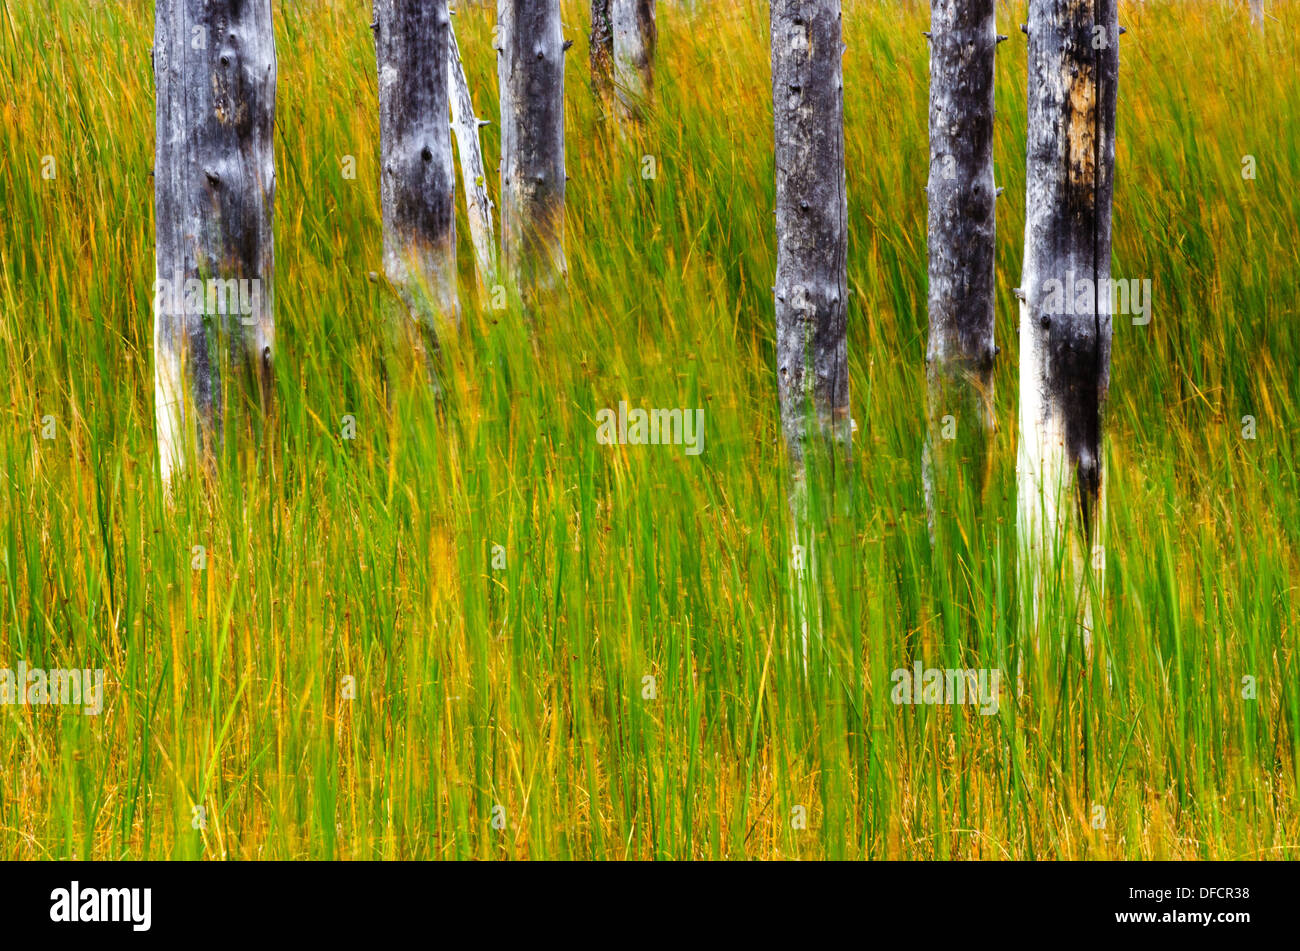 View of several burned tree trunks and long grass blurred by blowing wind Stock Photo